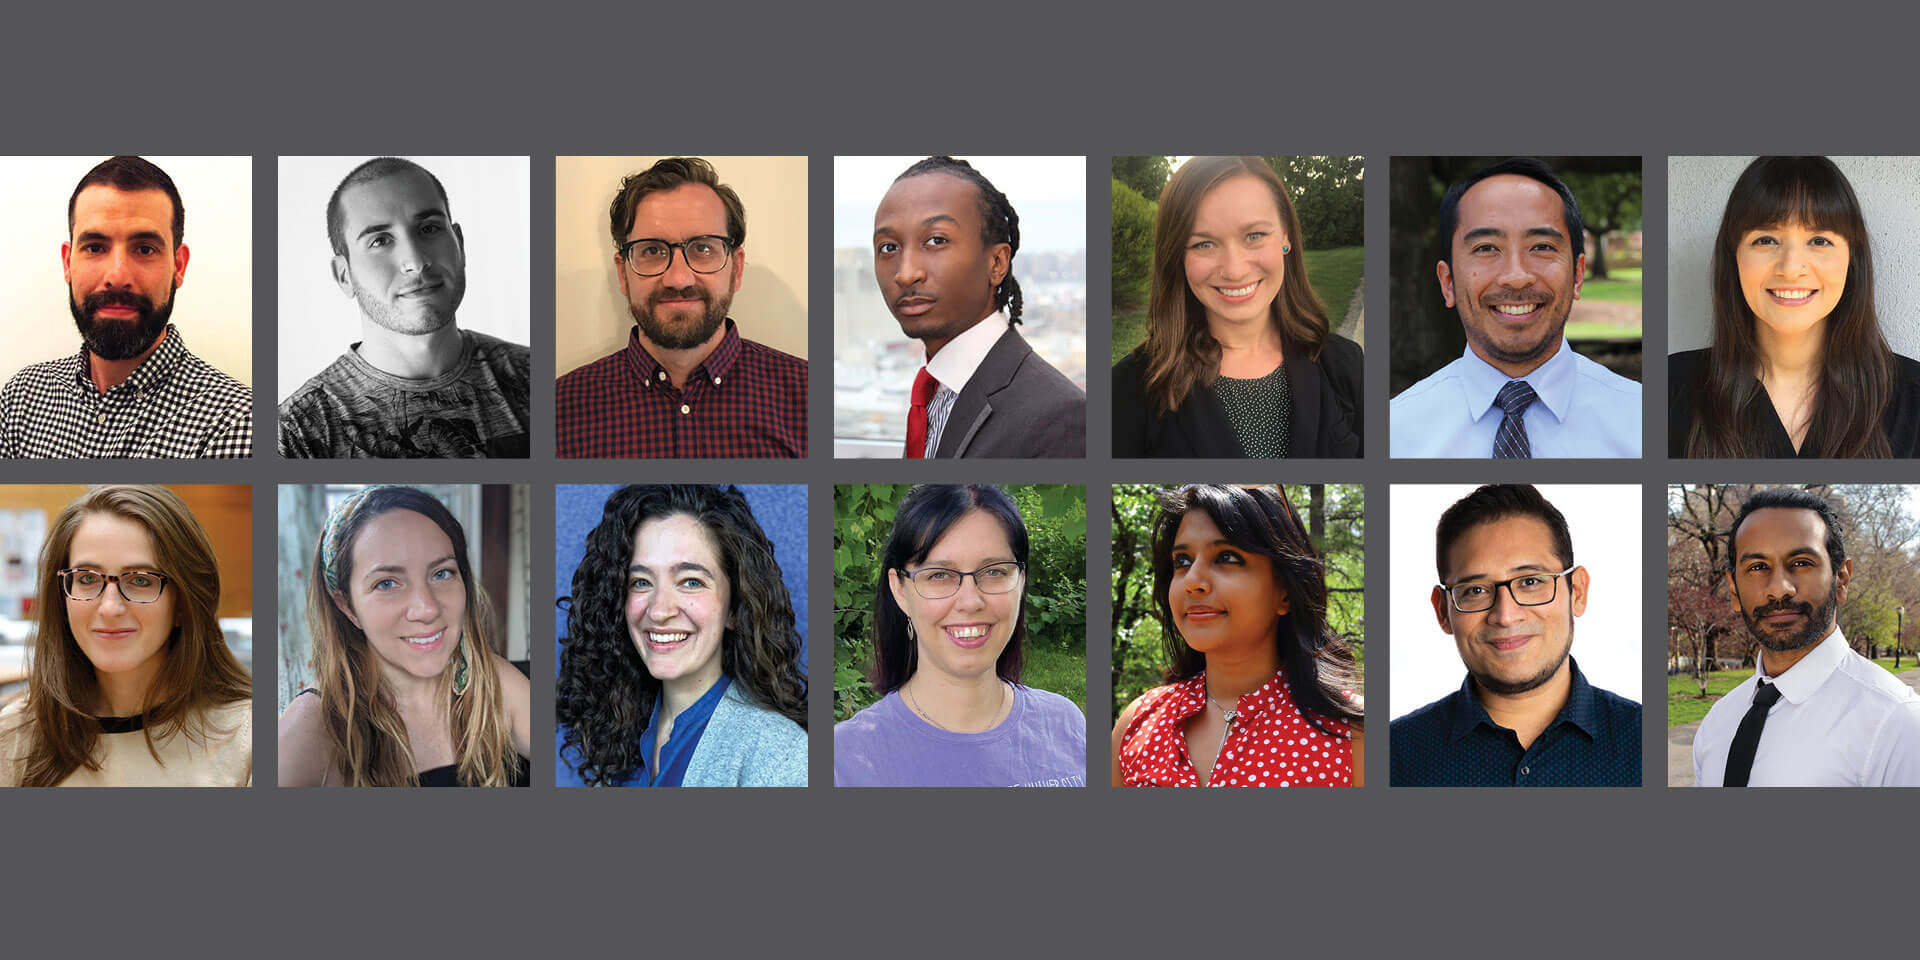 Thumbnail photos of each of the 14 new tenure-track faculty members in the College of Liberal & Creative Arts